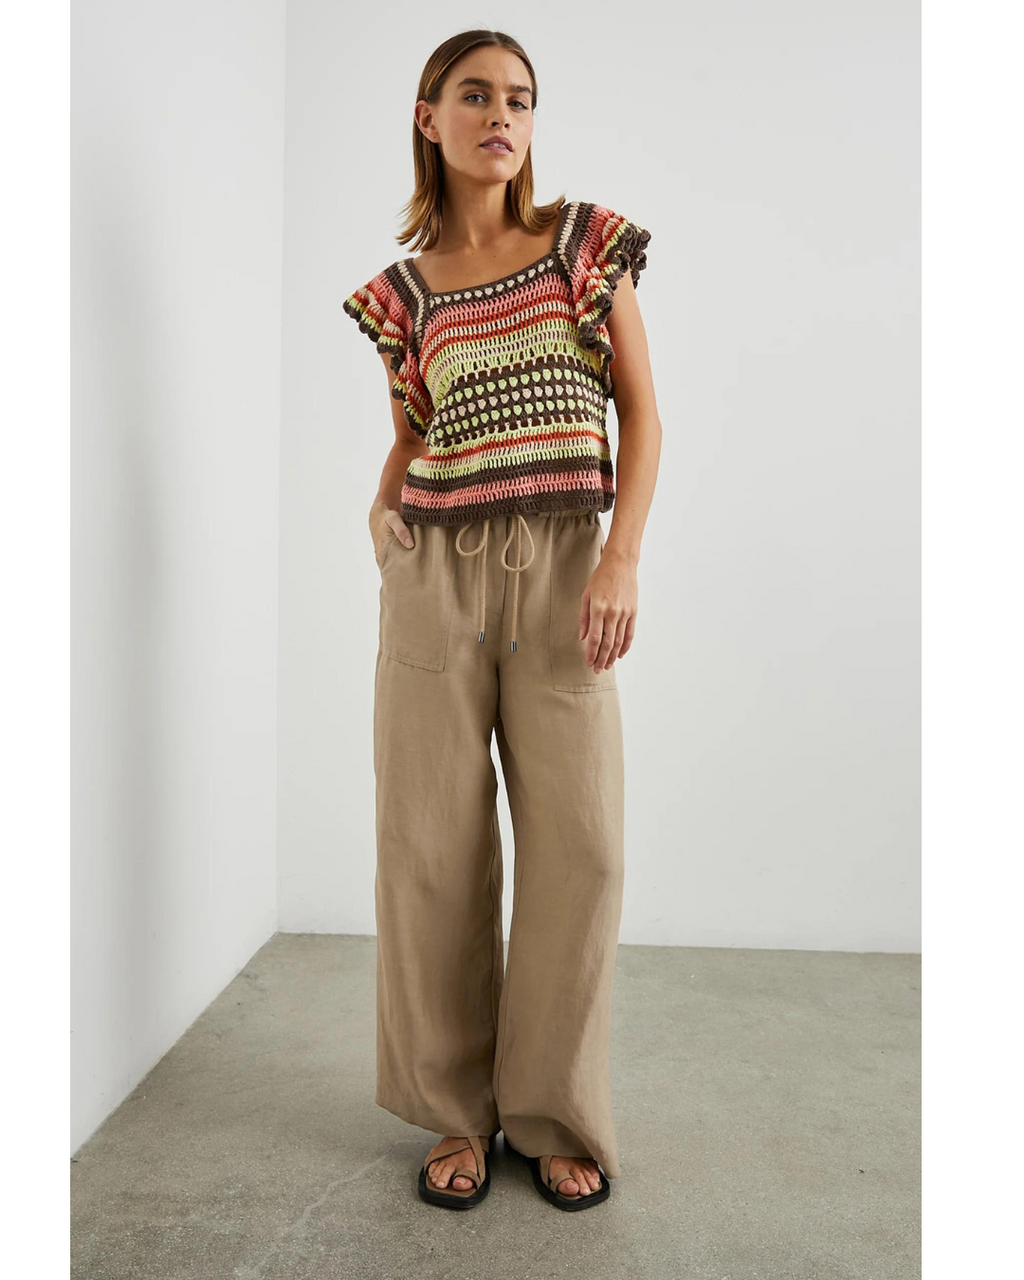  An image of a woman in a full-body pose wearing the Anna Crochet Top in vibrant tropical colors, paired with loose-fitting beige drawstring pants and black sandals.